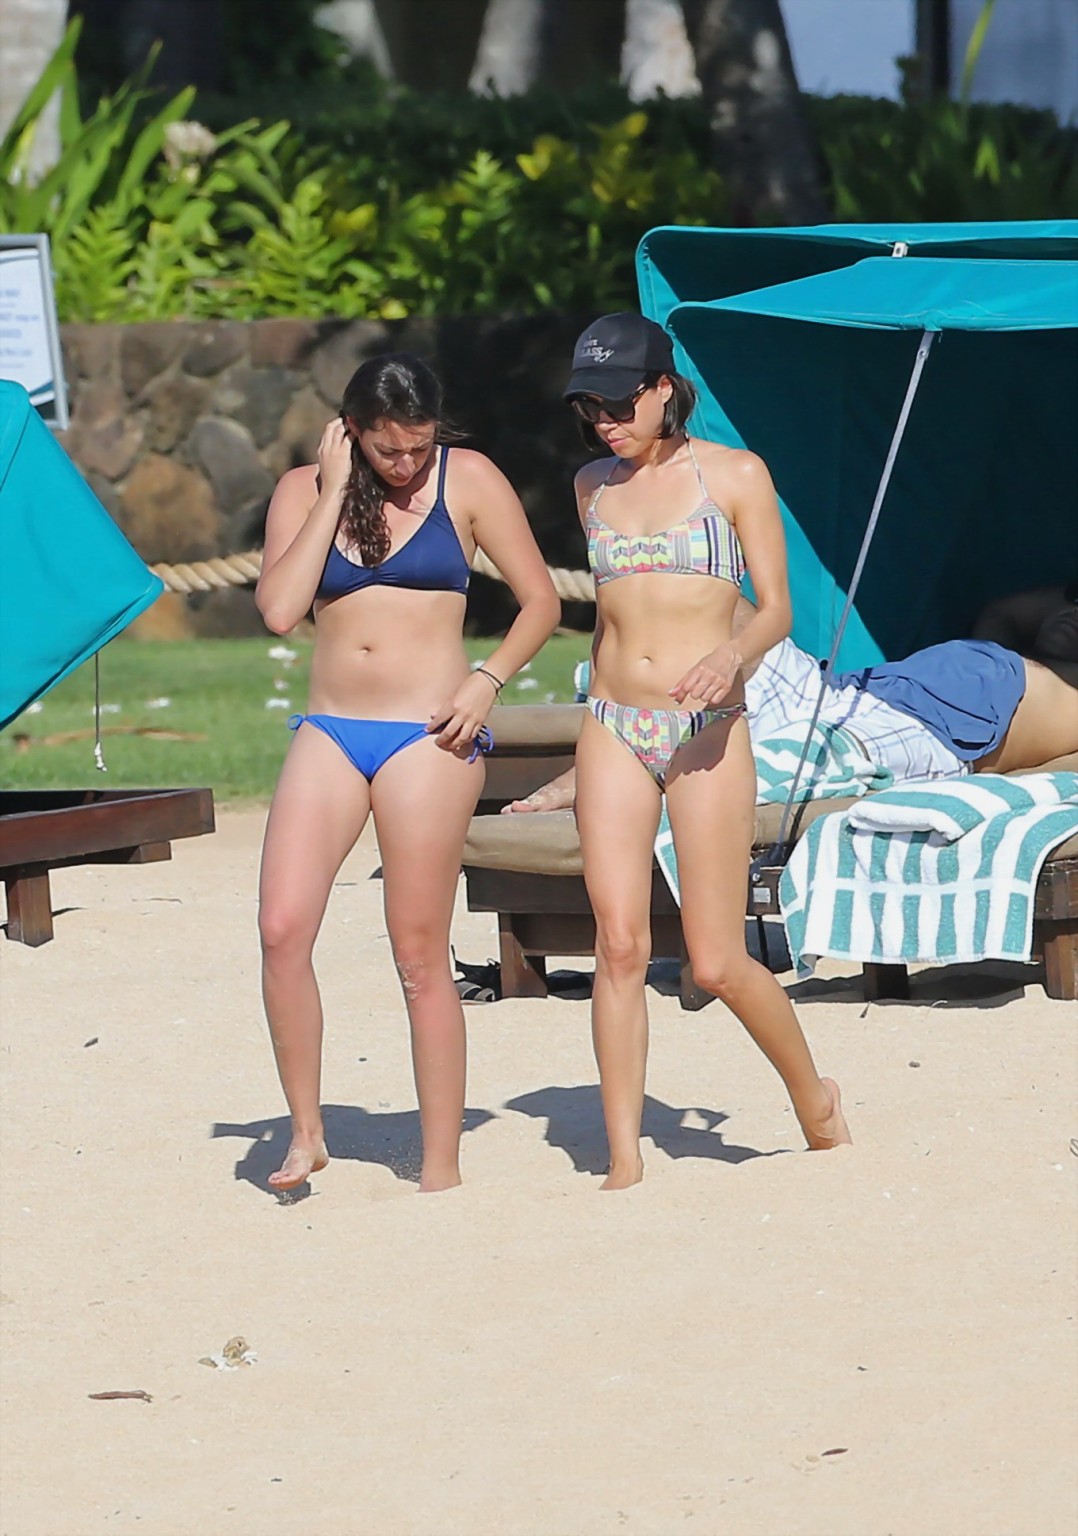 Aubrey Plaza showing off her hot body in skimpy colorful bikini at the beach in  #75161751